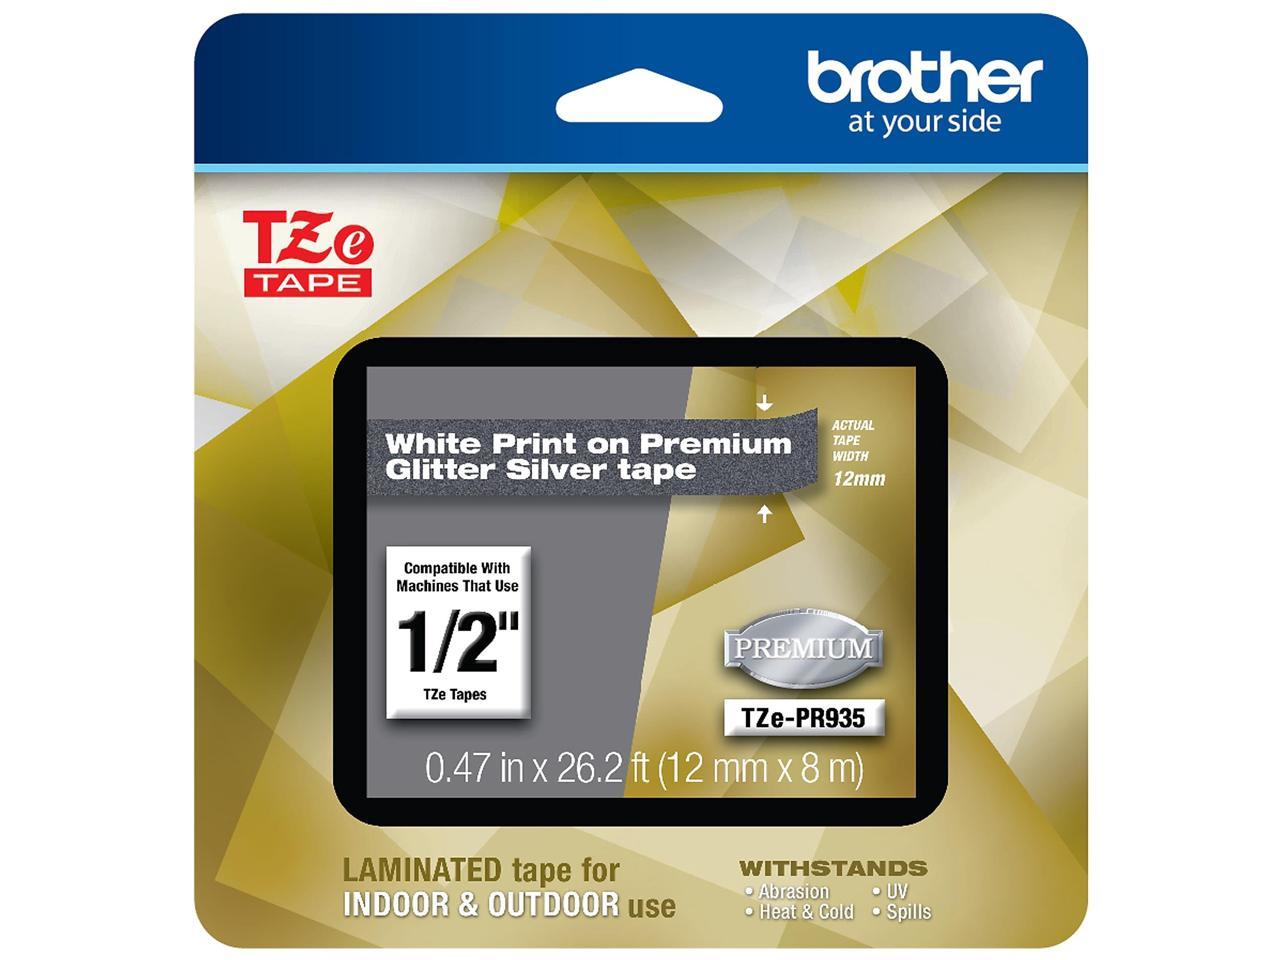 Brother TZePR935 White Print on Premium Glitter Silver Laminated Tape for P-touch Label Maker, 12mm (0.47â€?) wide x 8m (26.2') long